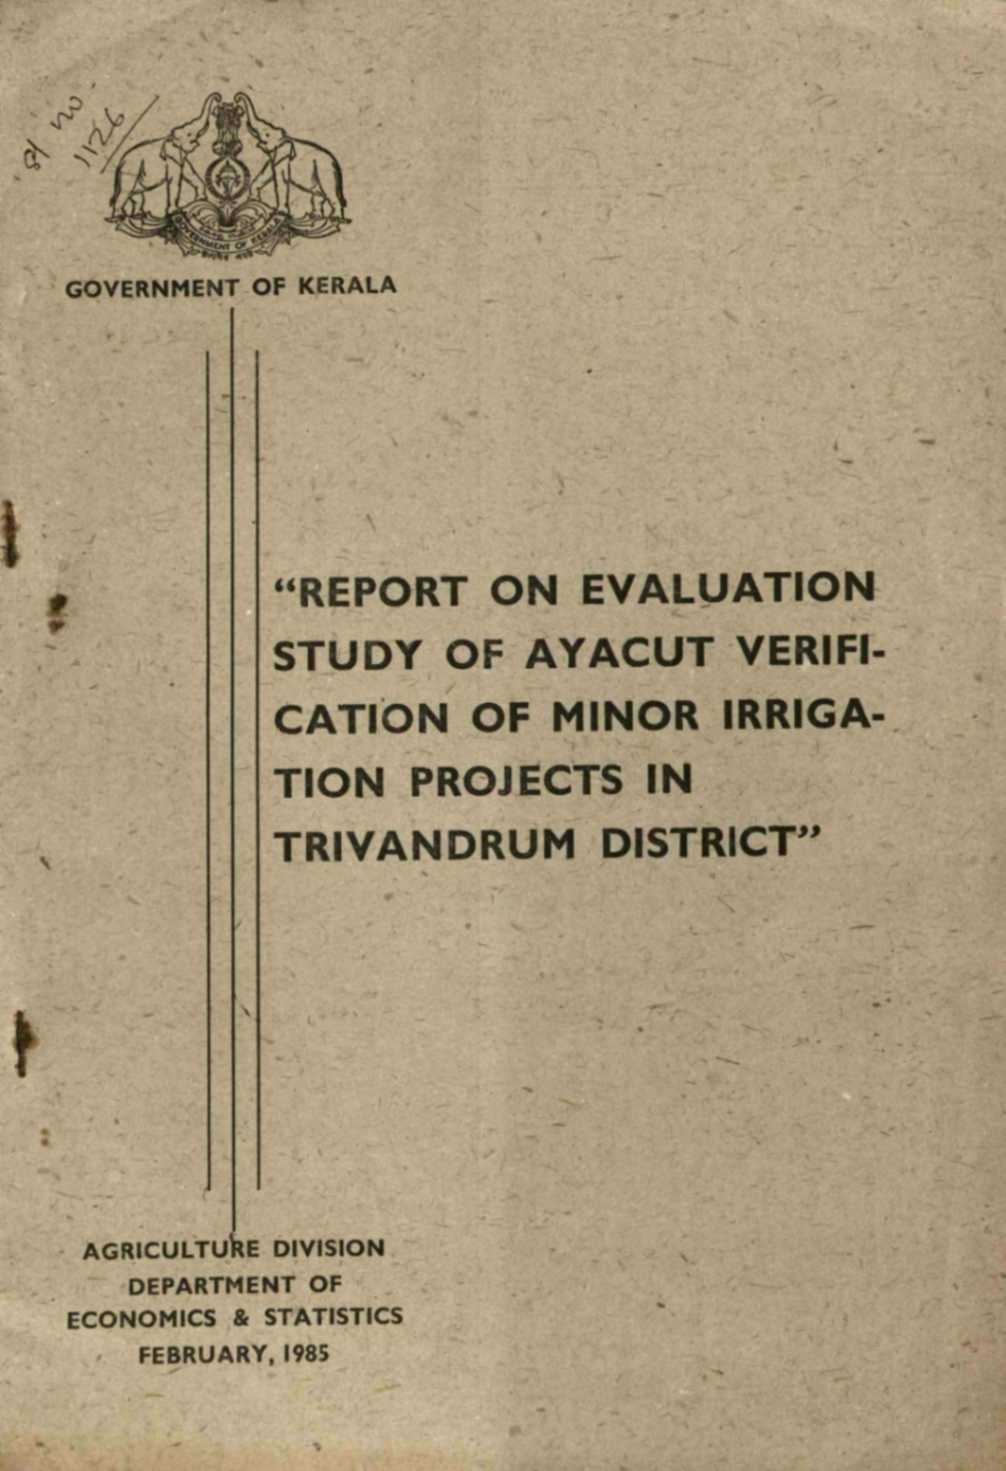 REPORT ON EVALUATION STUDY OF AYACUT VERIFICATION OF MINOR IRRIGATION PROJECTS IN KERALA